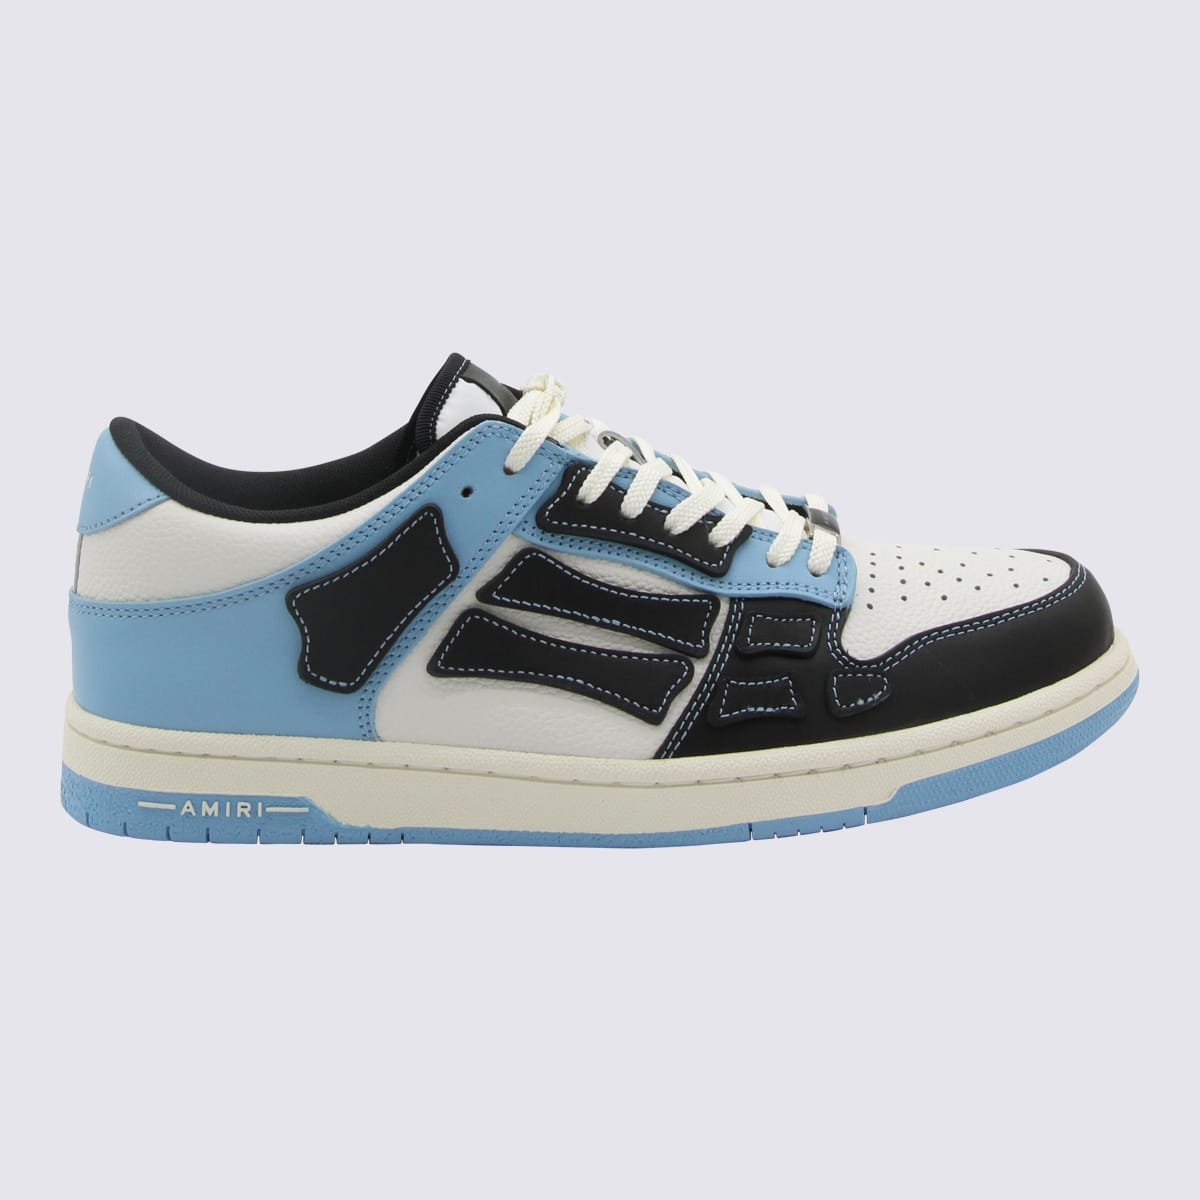 AMIRI BLACK, WHITE AND LIGHT BLUE LEATHER SNEAKERS